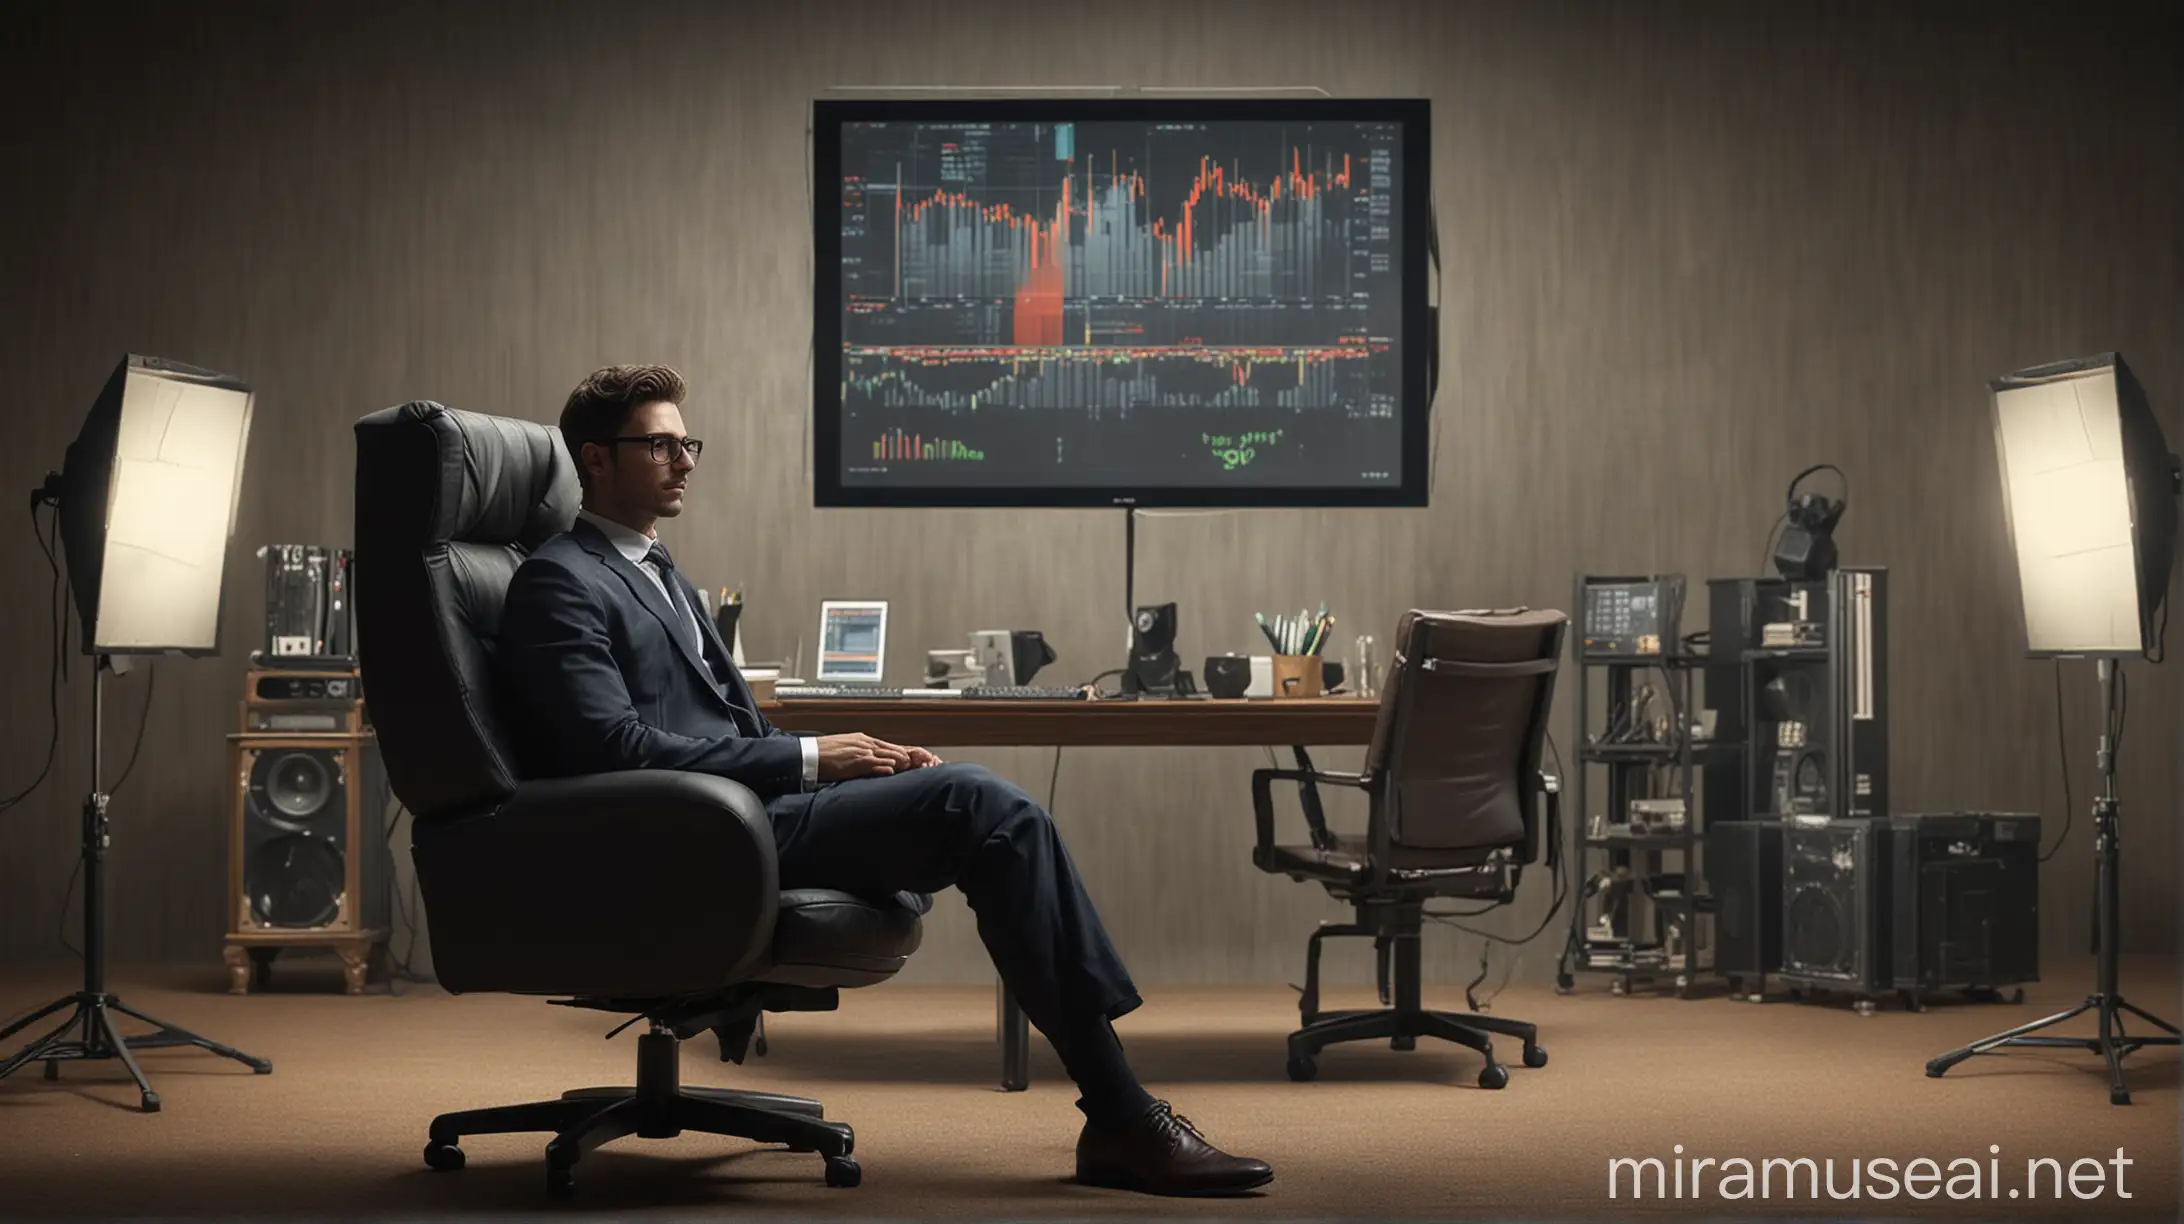 a man sitting in chair and with formal clothes in the middle of the room, scenography of a computer setup studio in the background, stock market ambient, stock market on computer screen,professional photography style from a photography studio, 4k, ultra realistic, rich in details. super texture, professional camera quality. hdrplus.